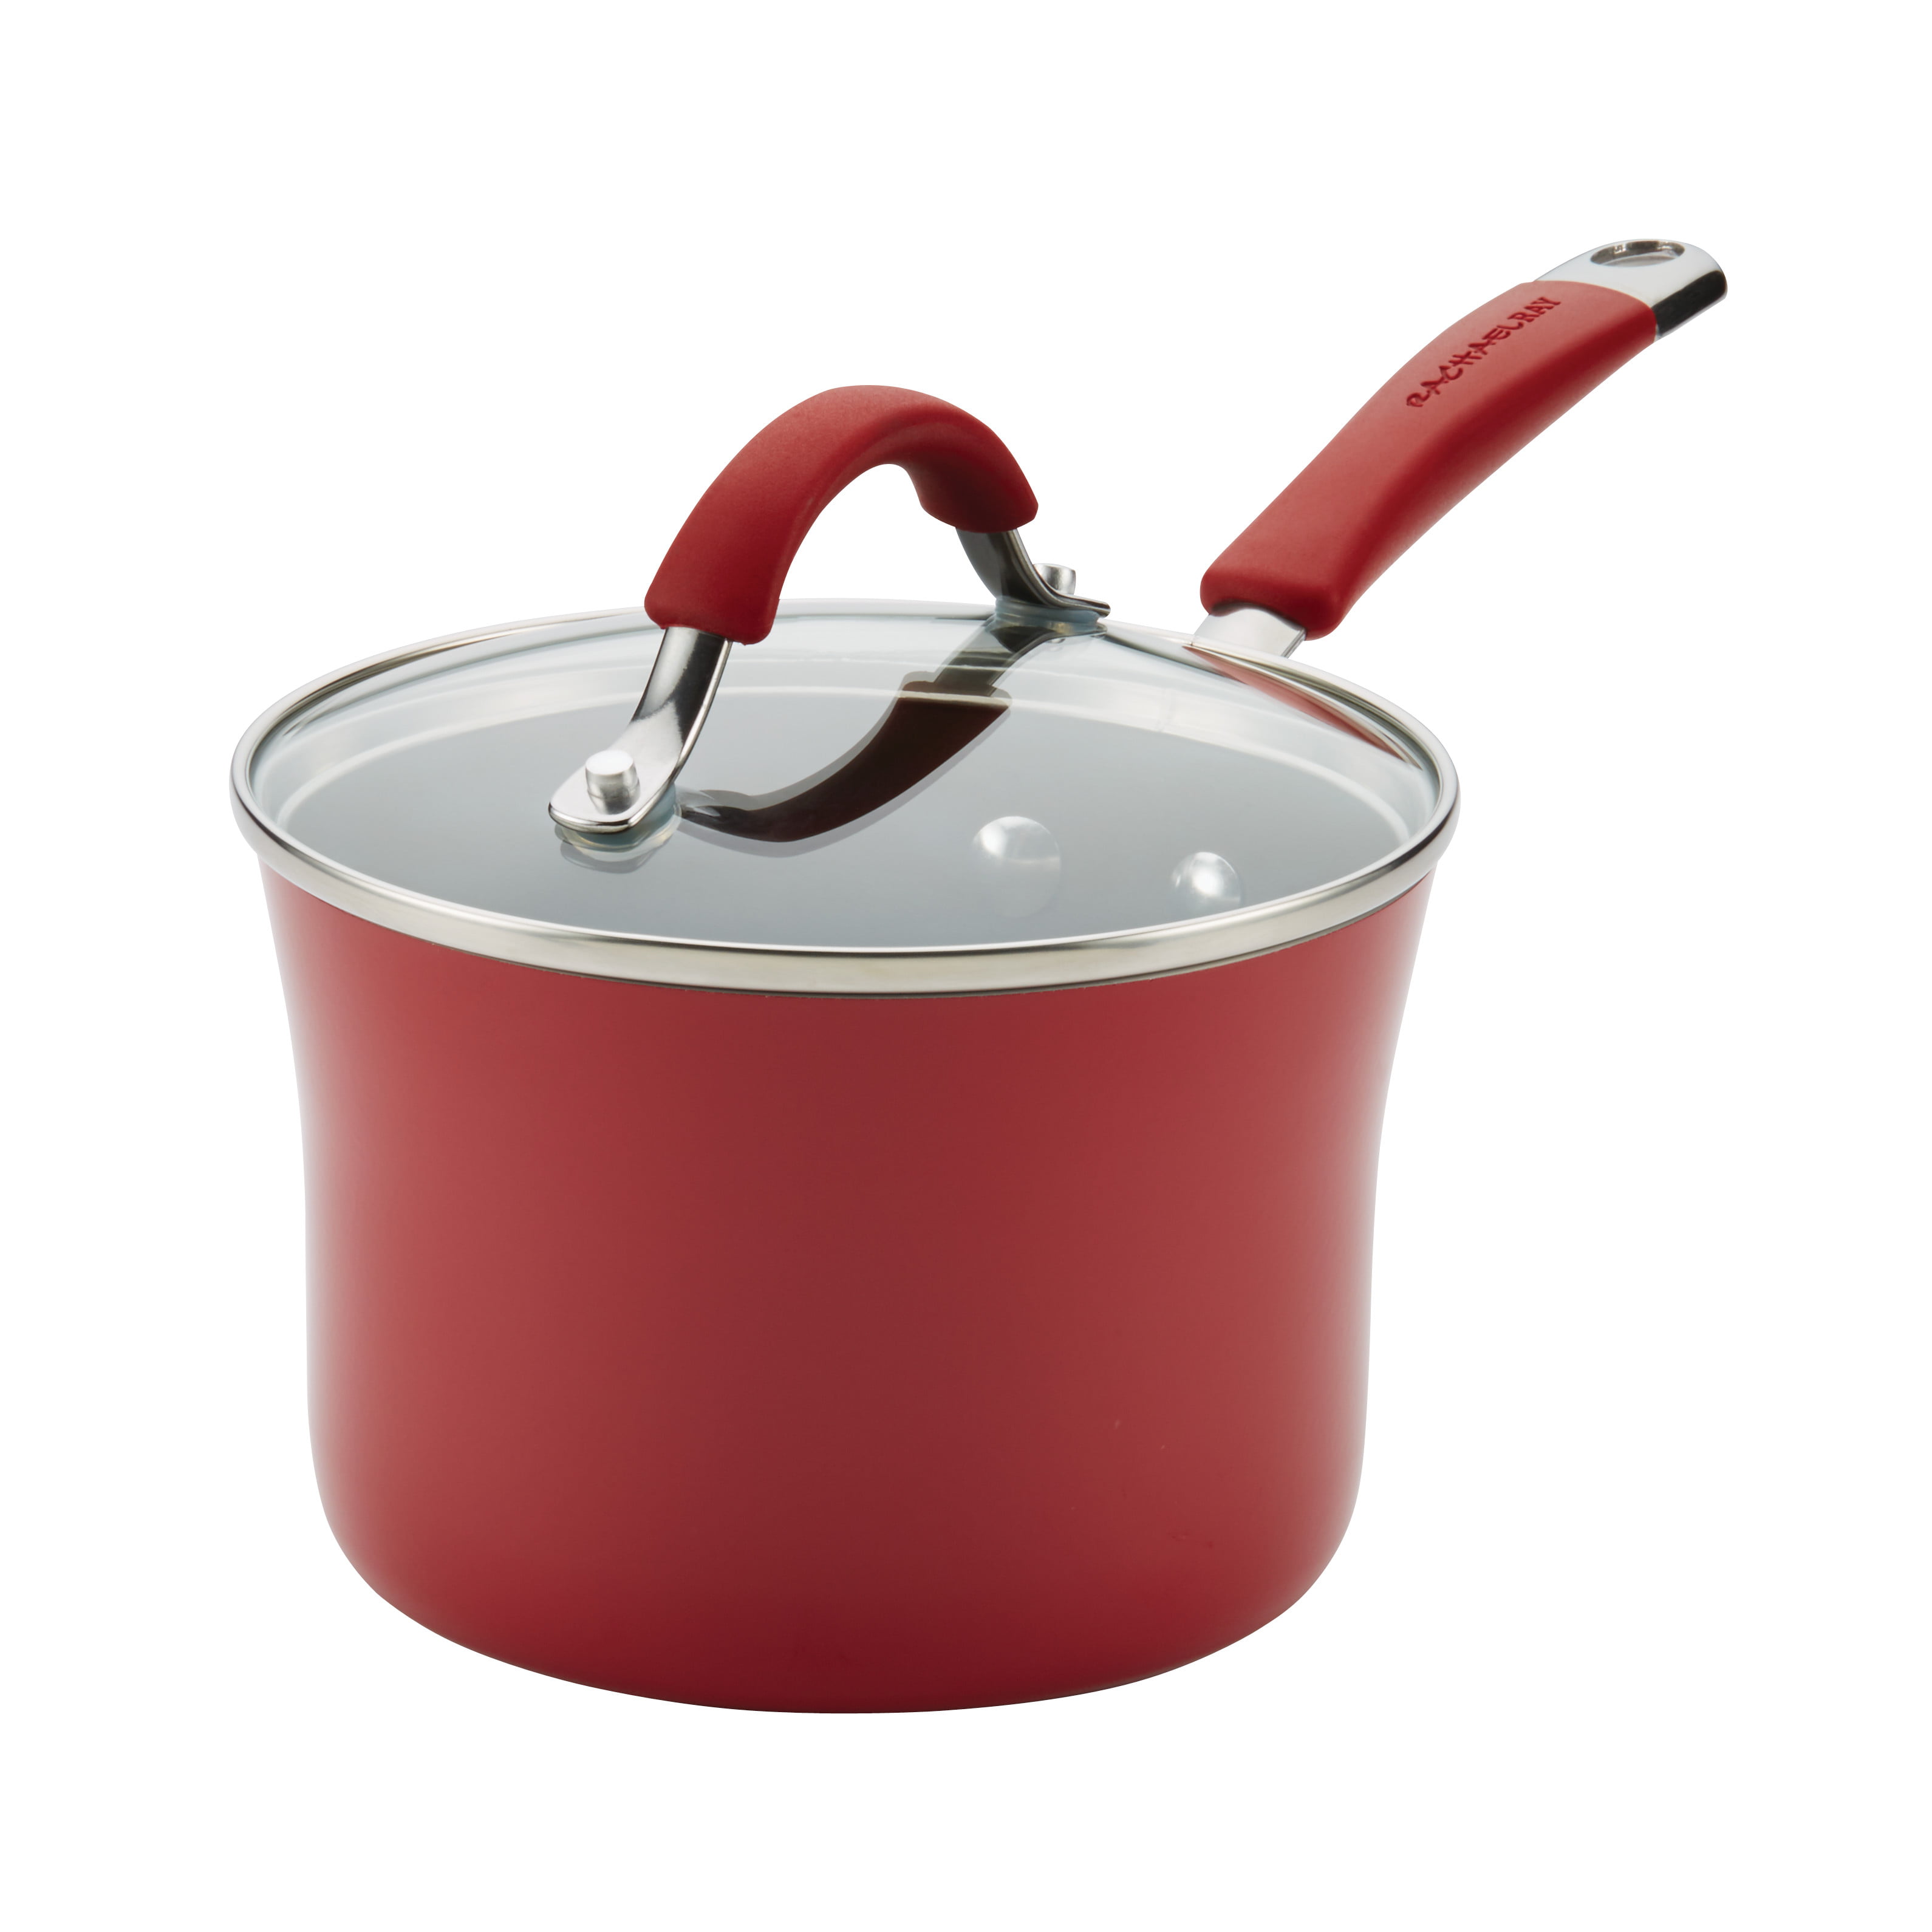 Købenstyle Saucepan, 2 qt in Chestnut by Schoolhouse